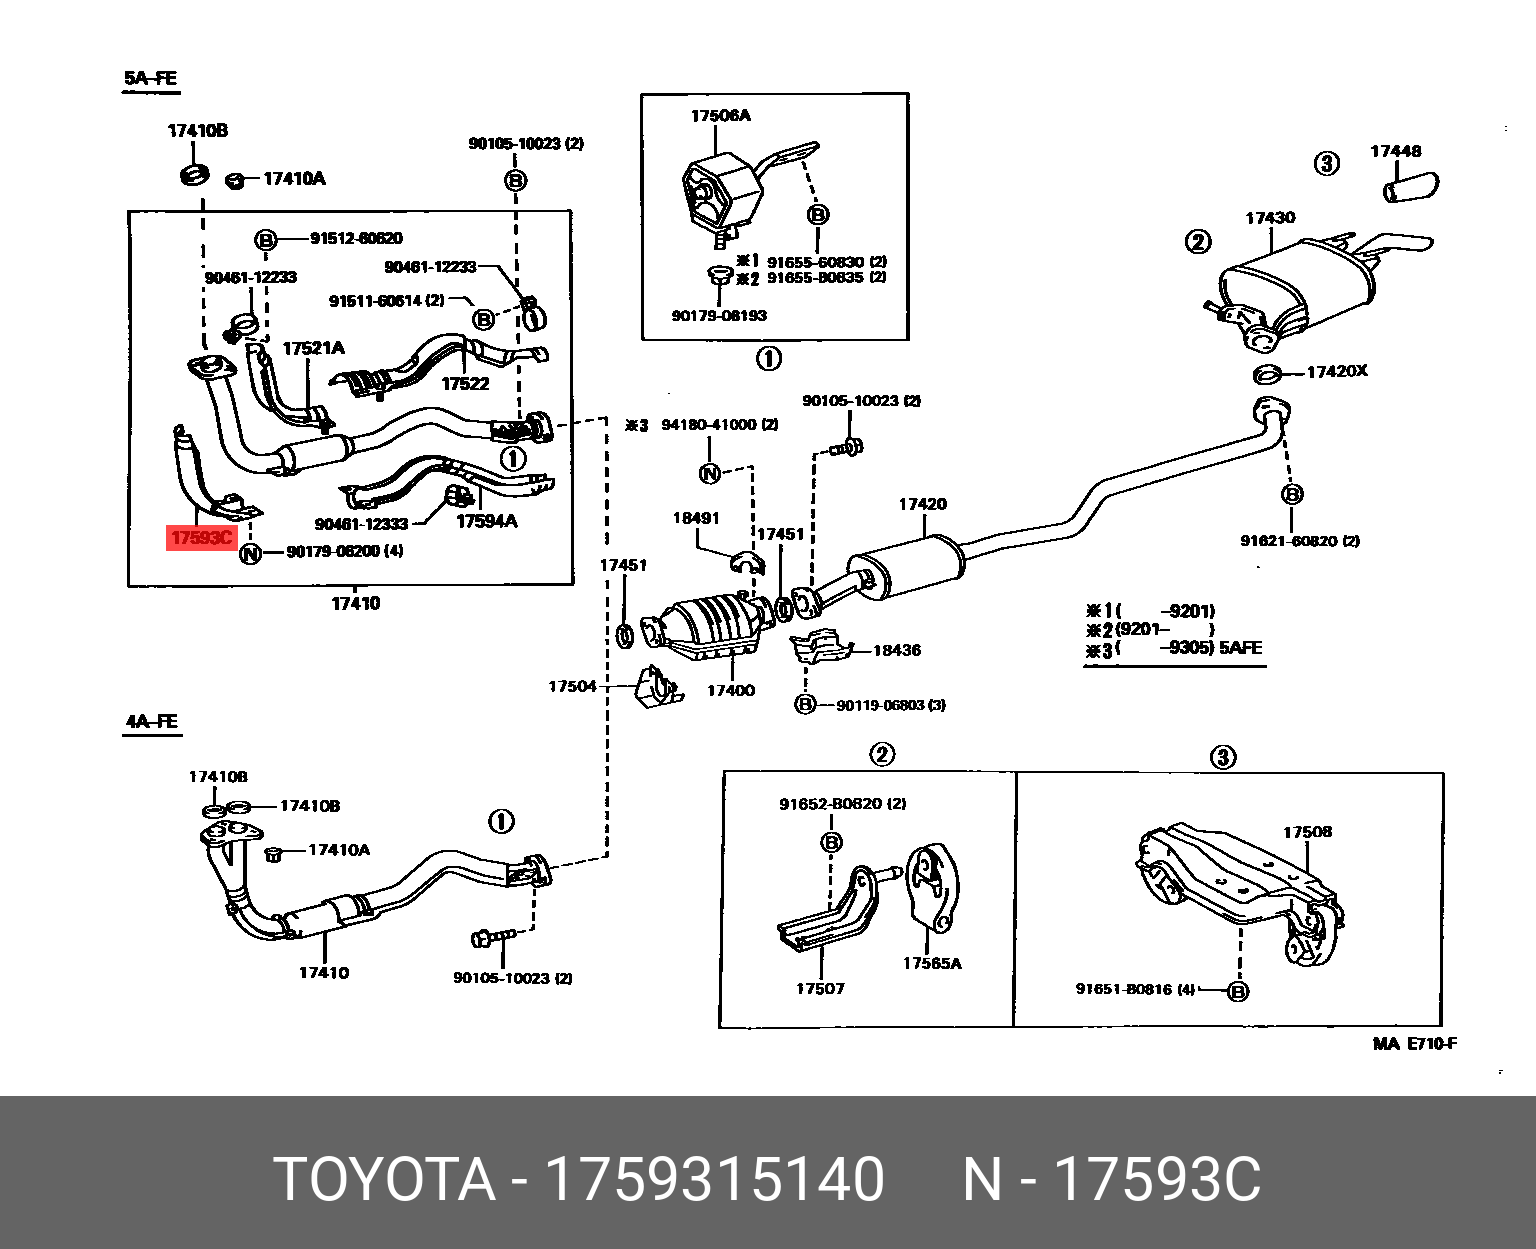 SPRINTER 199106 - 200206, PROTECTOR, EXHAUST PIPE, LOWER NO.1